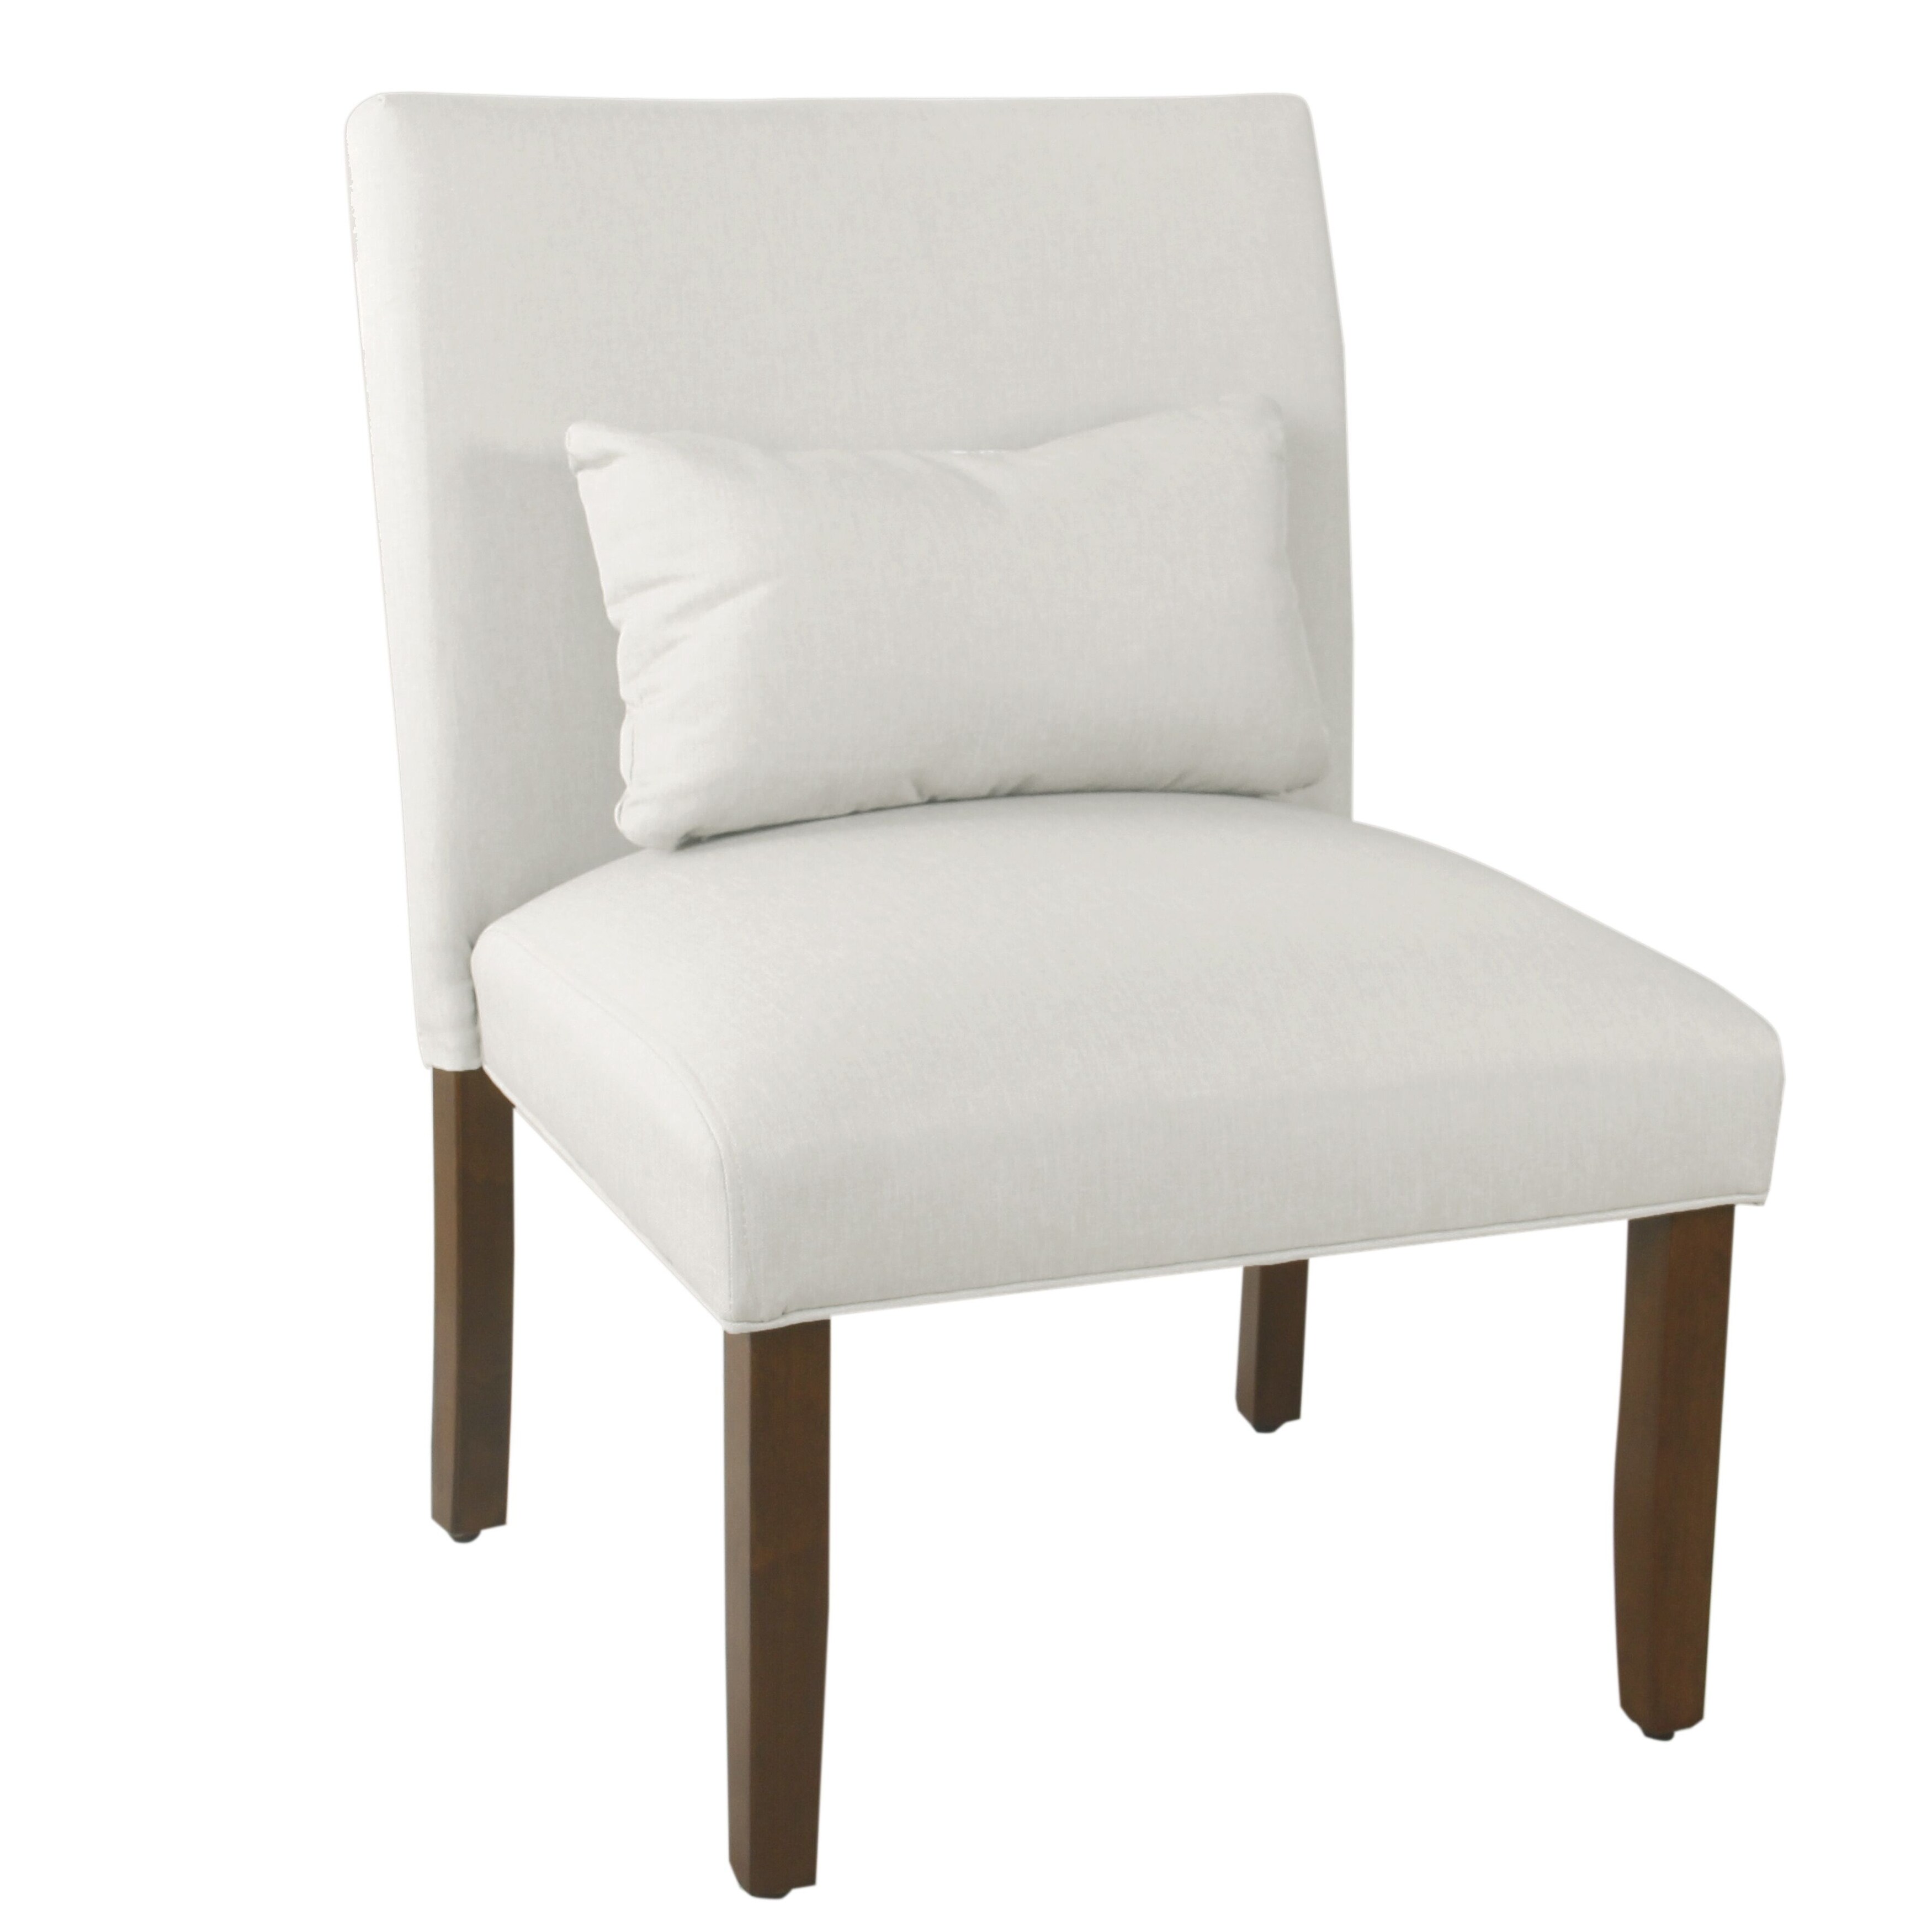 Porch & Den Alsea Accent Chair with Pillow - Overstock - 12539320